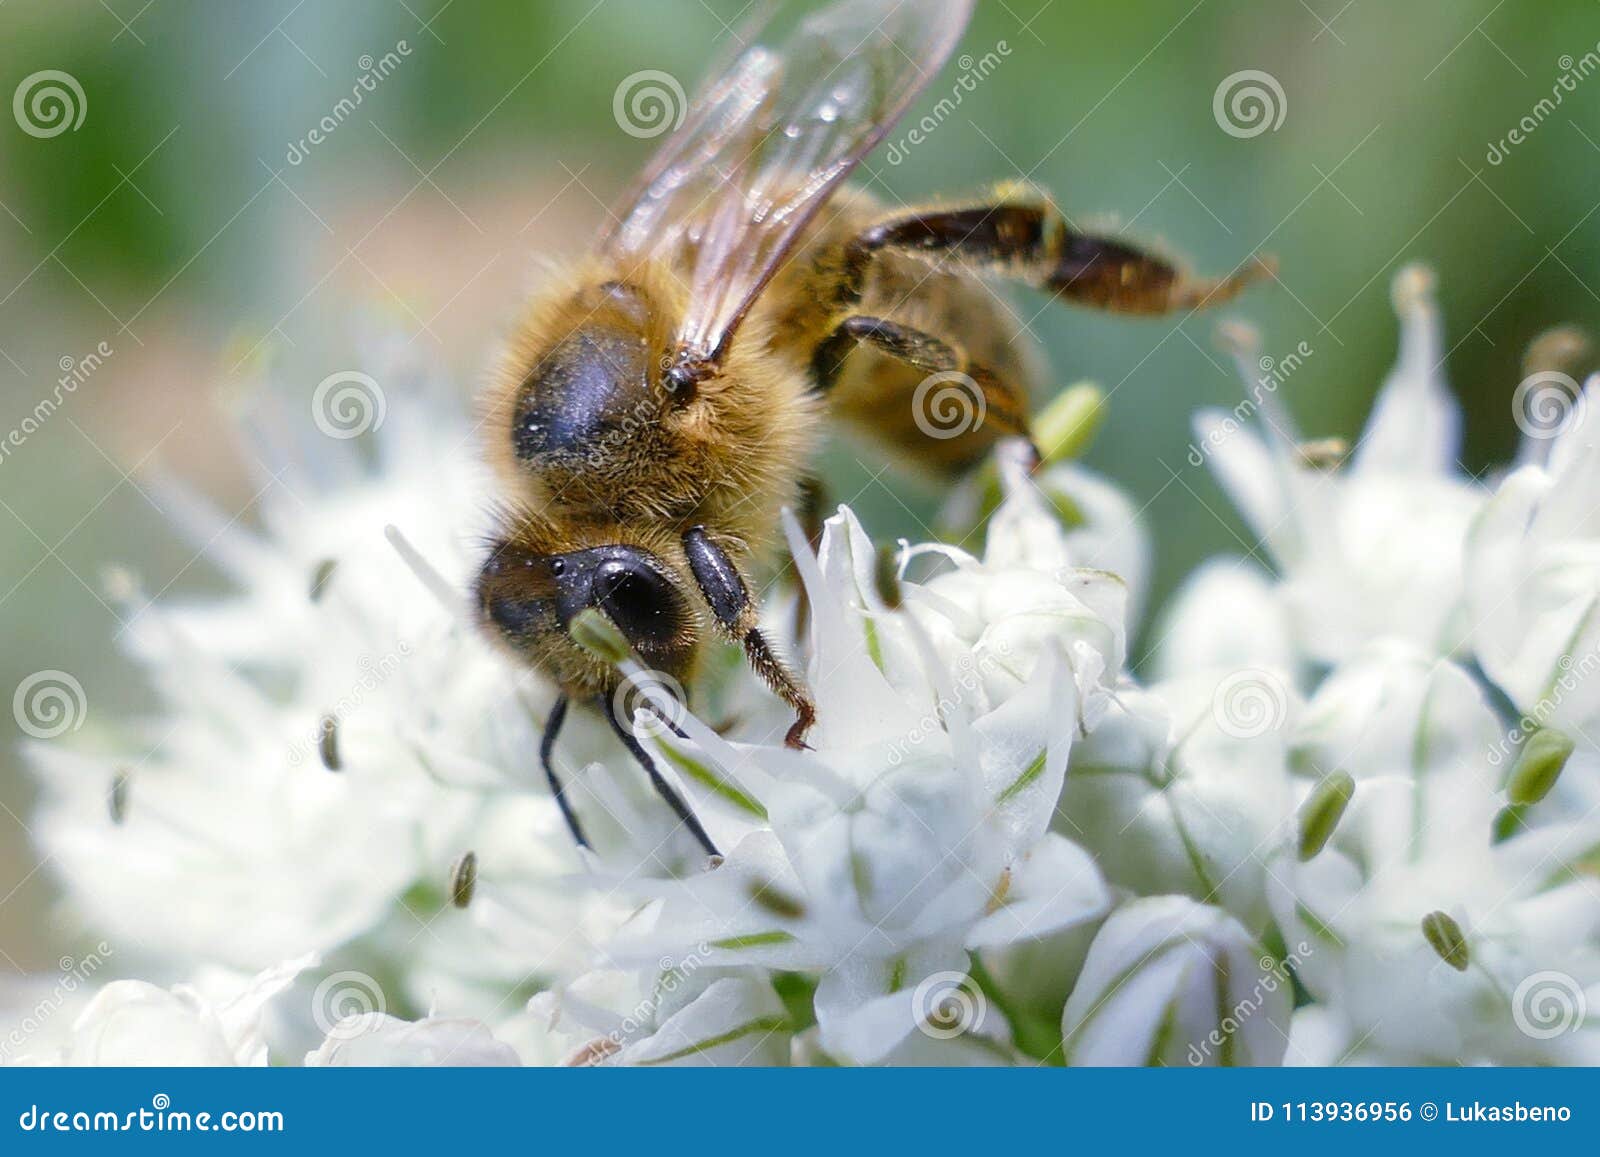 close up of honey bee pollinating flower in the garden. detail view of european honeybee pollinate flower on summer time